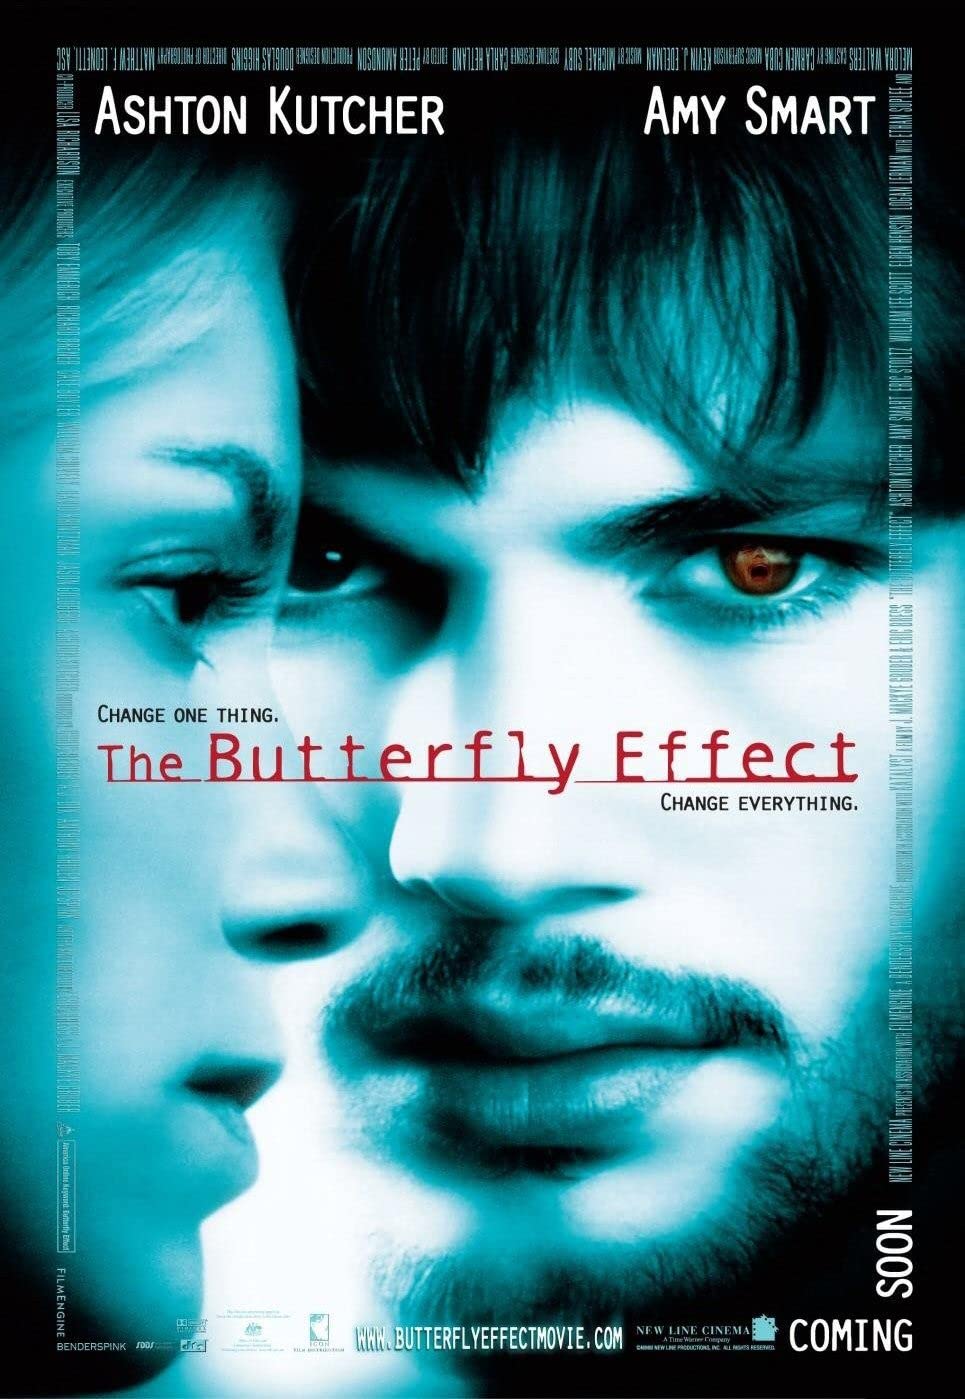 Time traveler movie about the butterfly effect (https://www.imdb.com/title/tt0289879/)